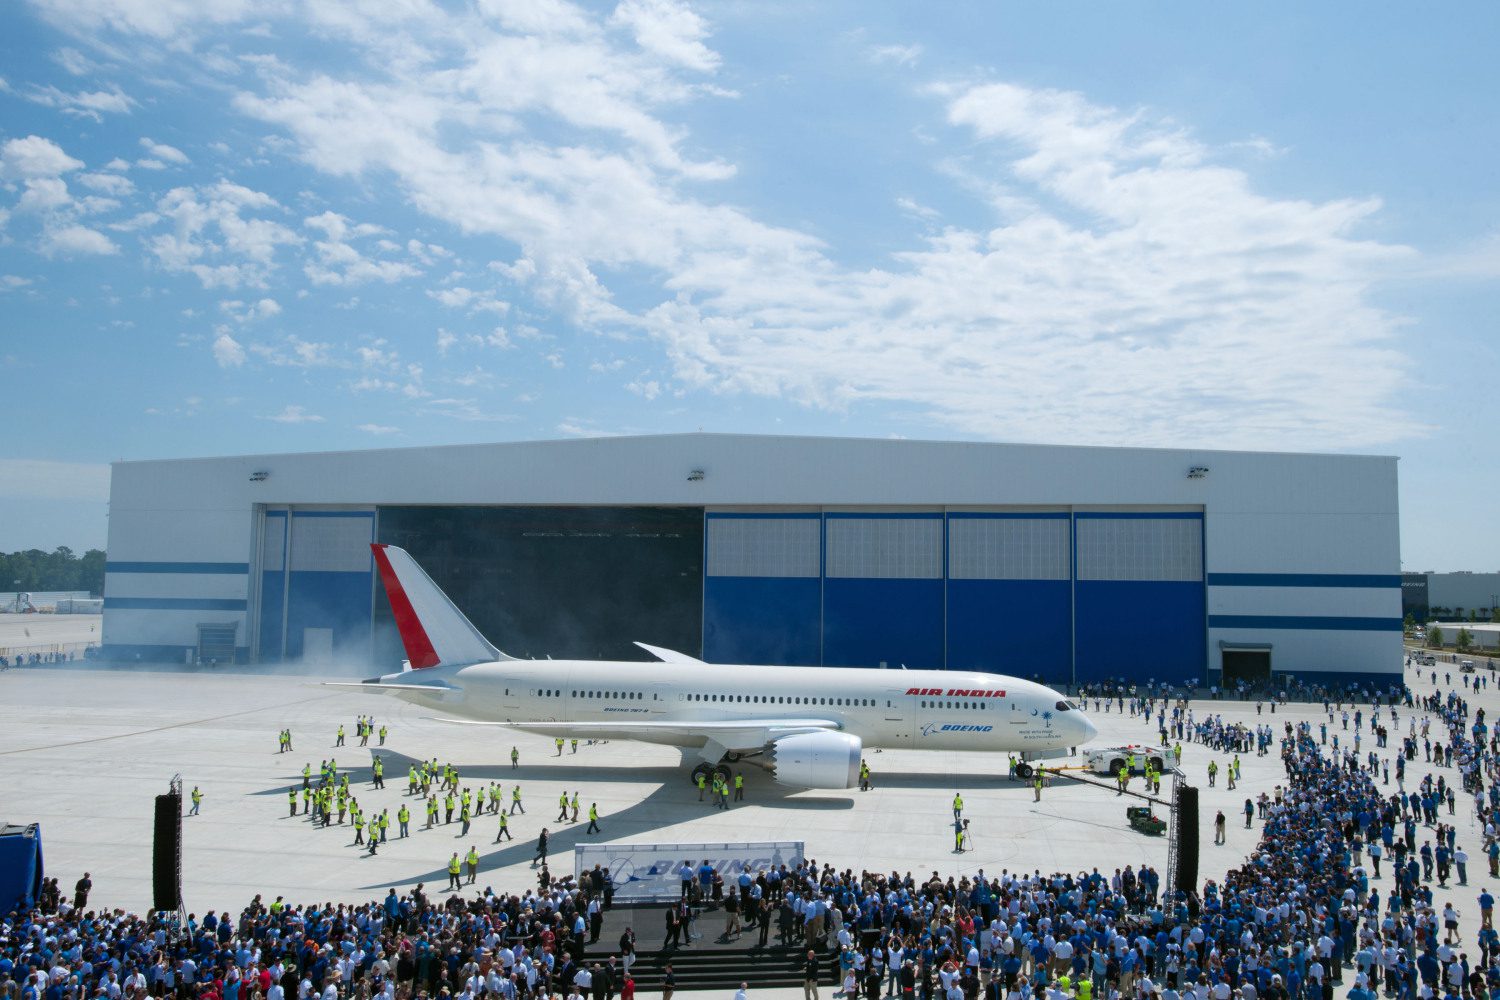 Gray and blue hangar with white plane and crowd